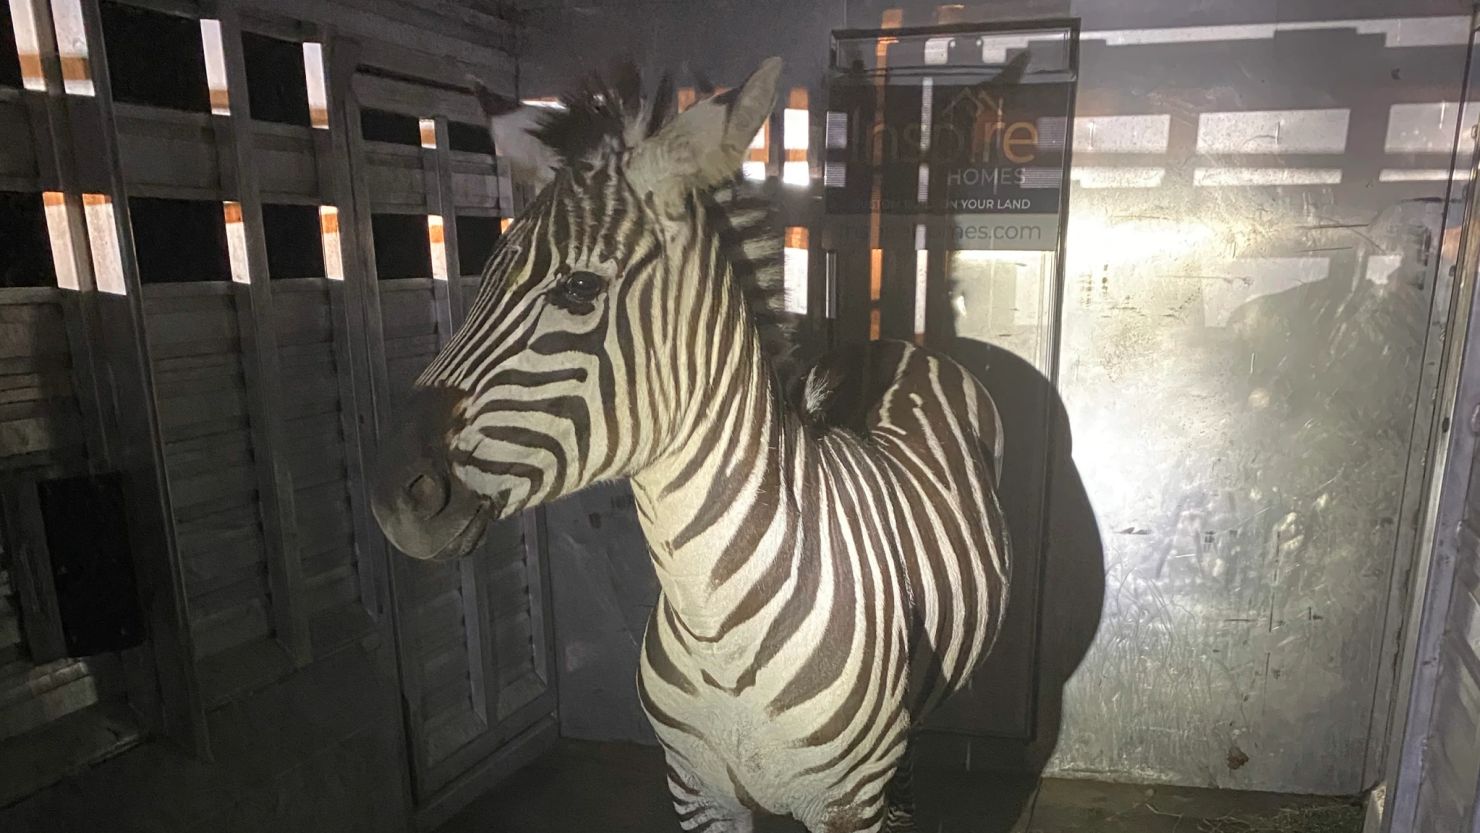 Shug the zebra appears to be in good health after almost six days on the loose, according to local animal services.